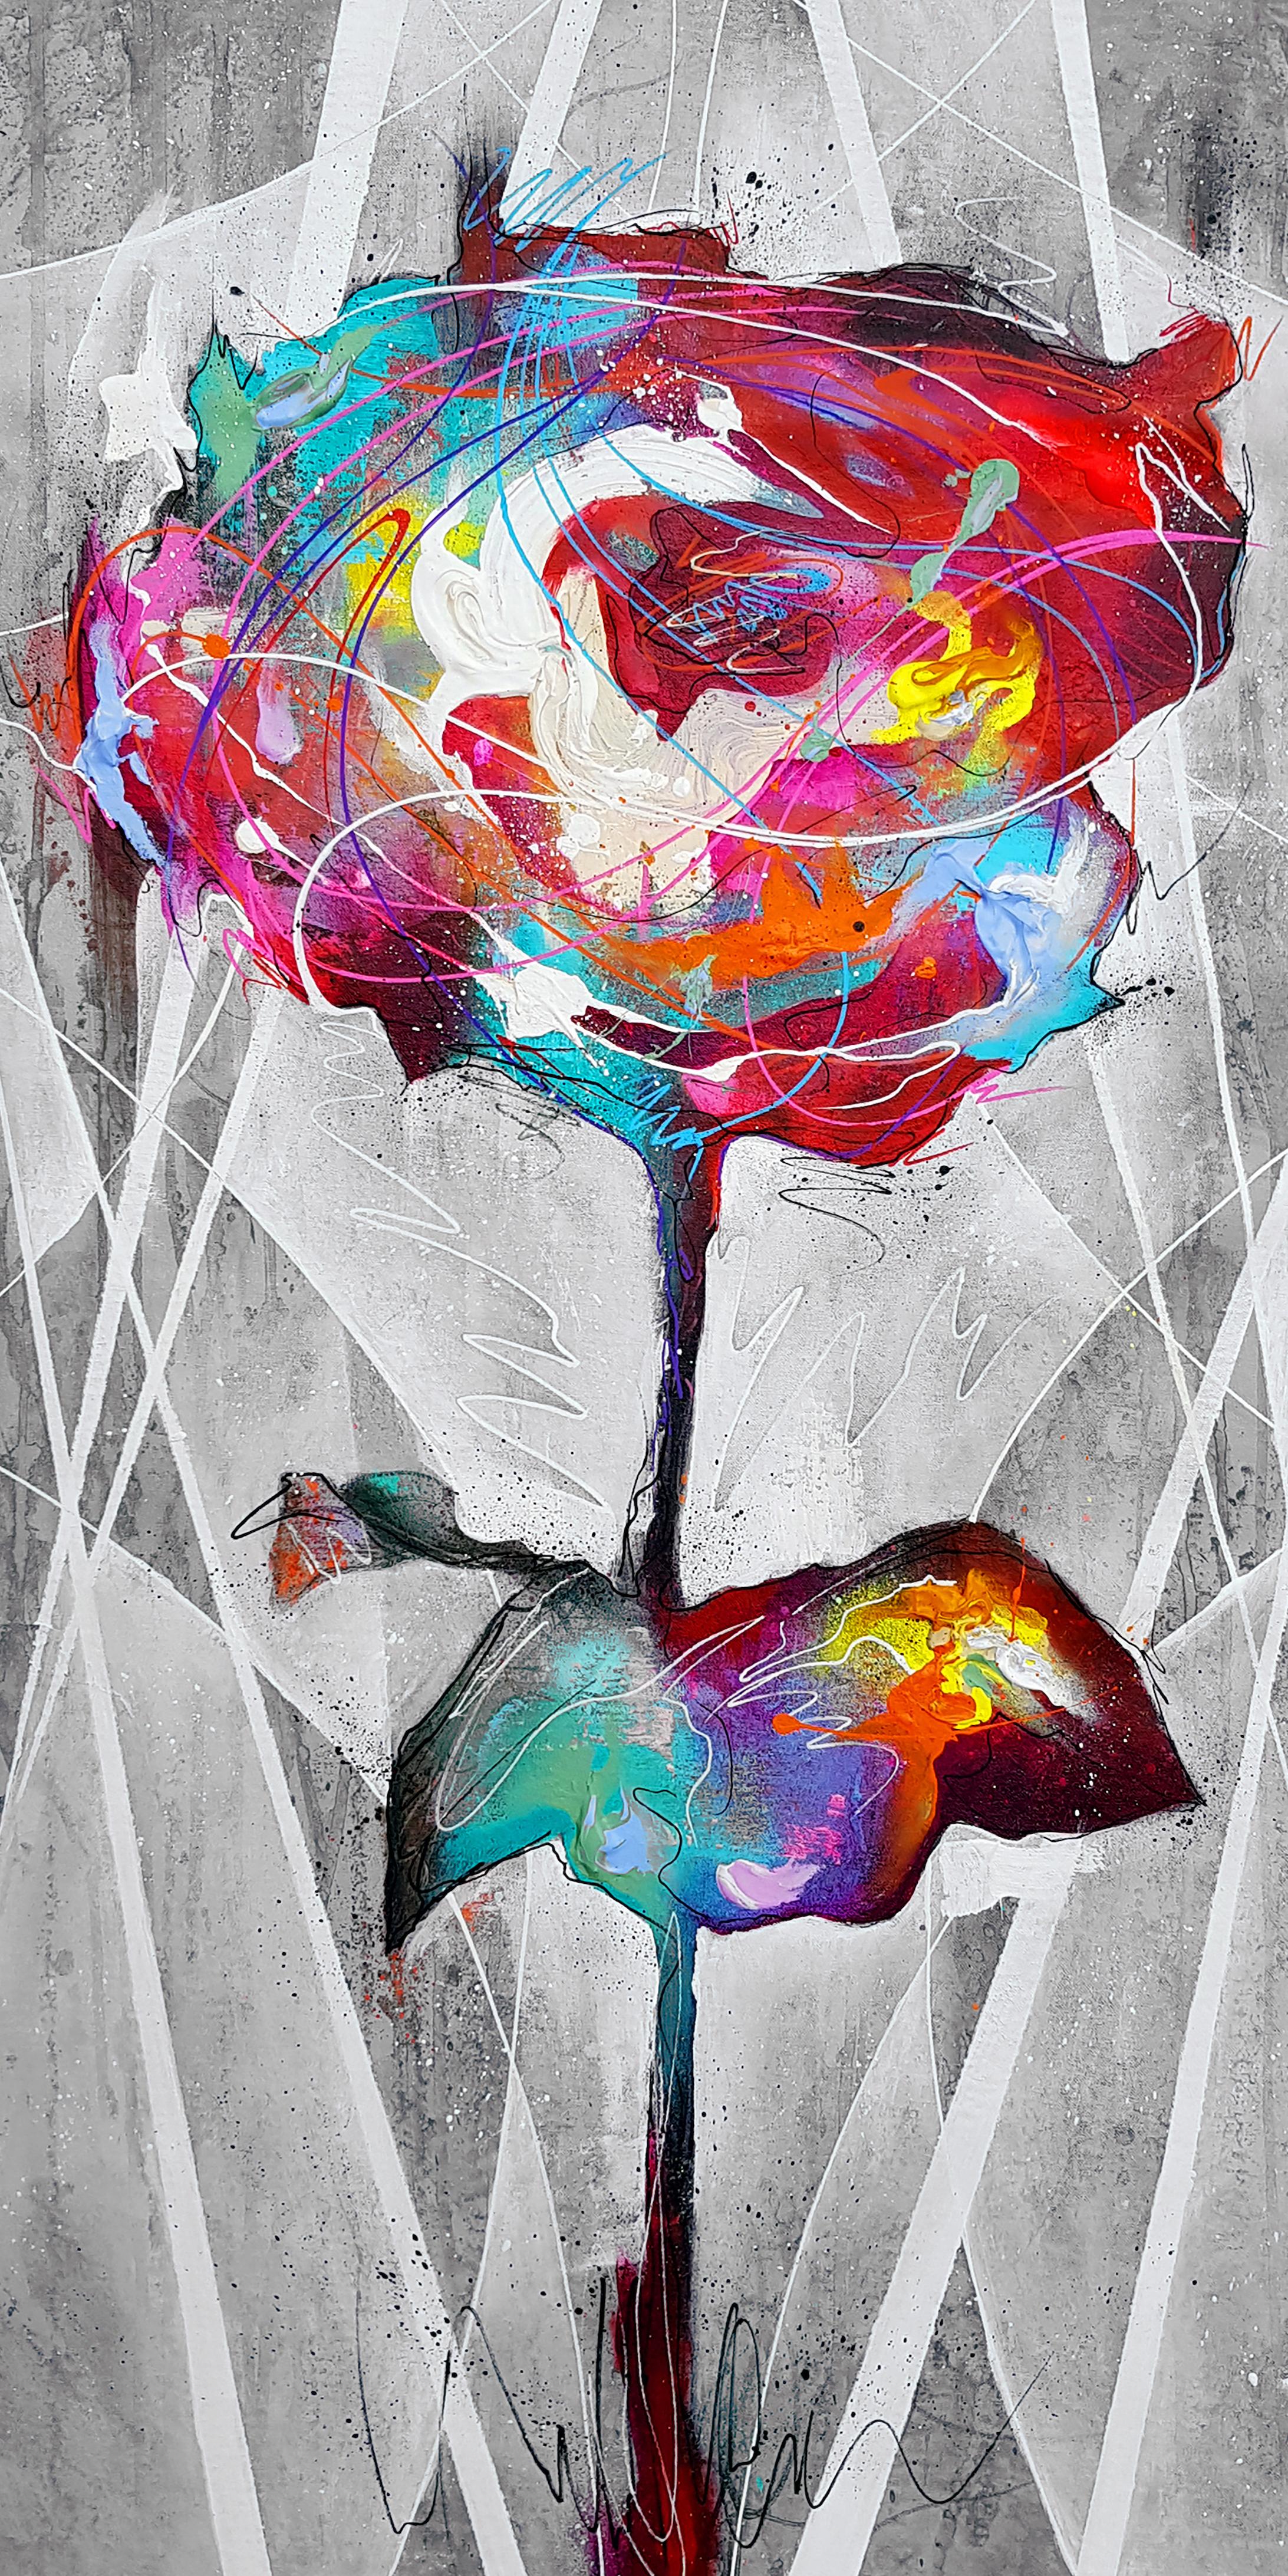 Danny O'Connor Figurative Painting - Rose - 21st Century, Contemporary Painting, Graffiti, Flower, Mixed Media